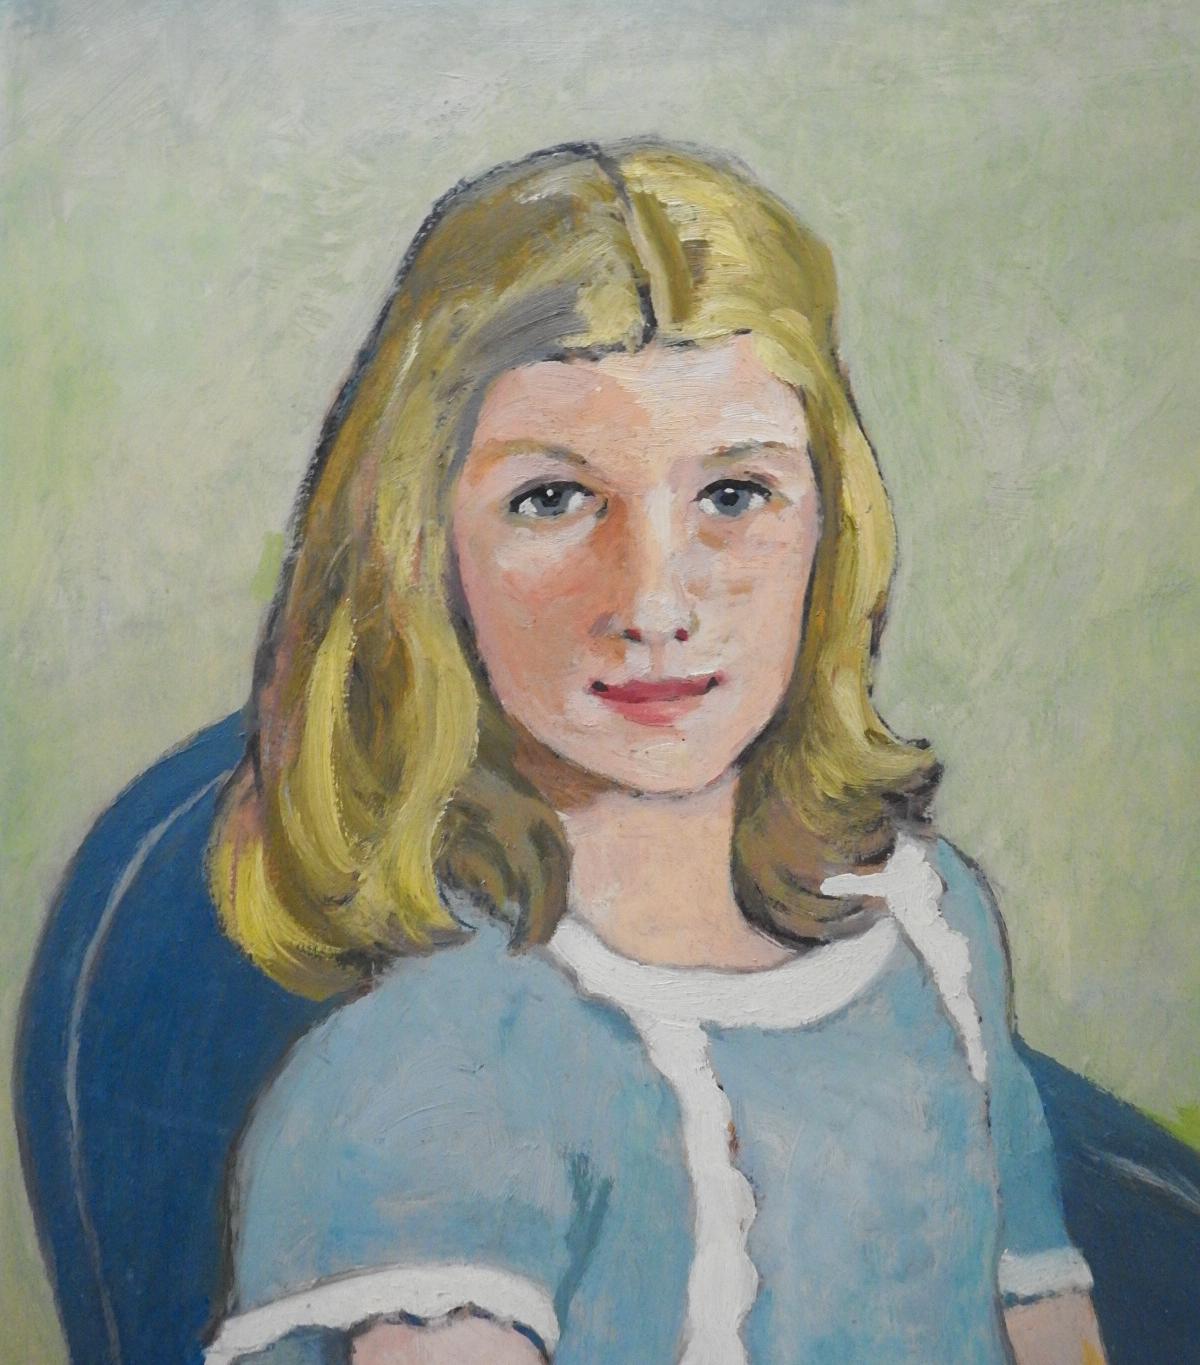 American Vintage Mid 20th Century Portrait of Girl in Blue Dress Painting For Sale